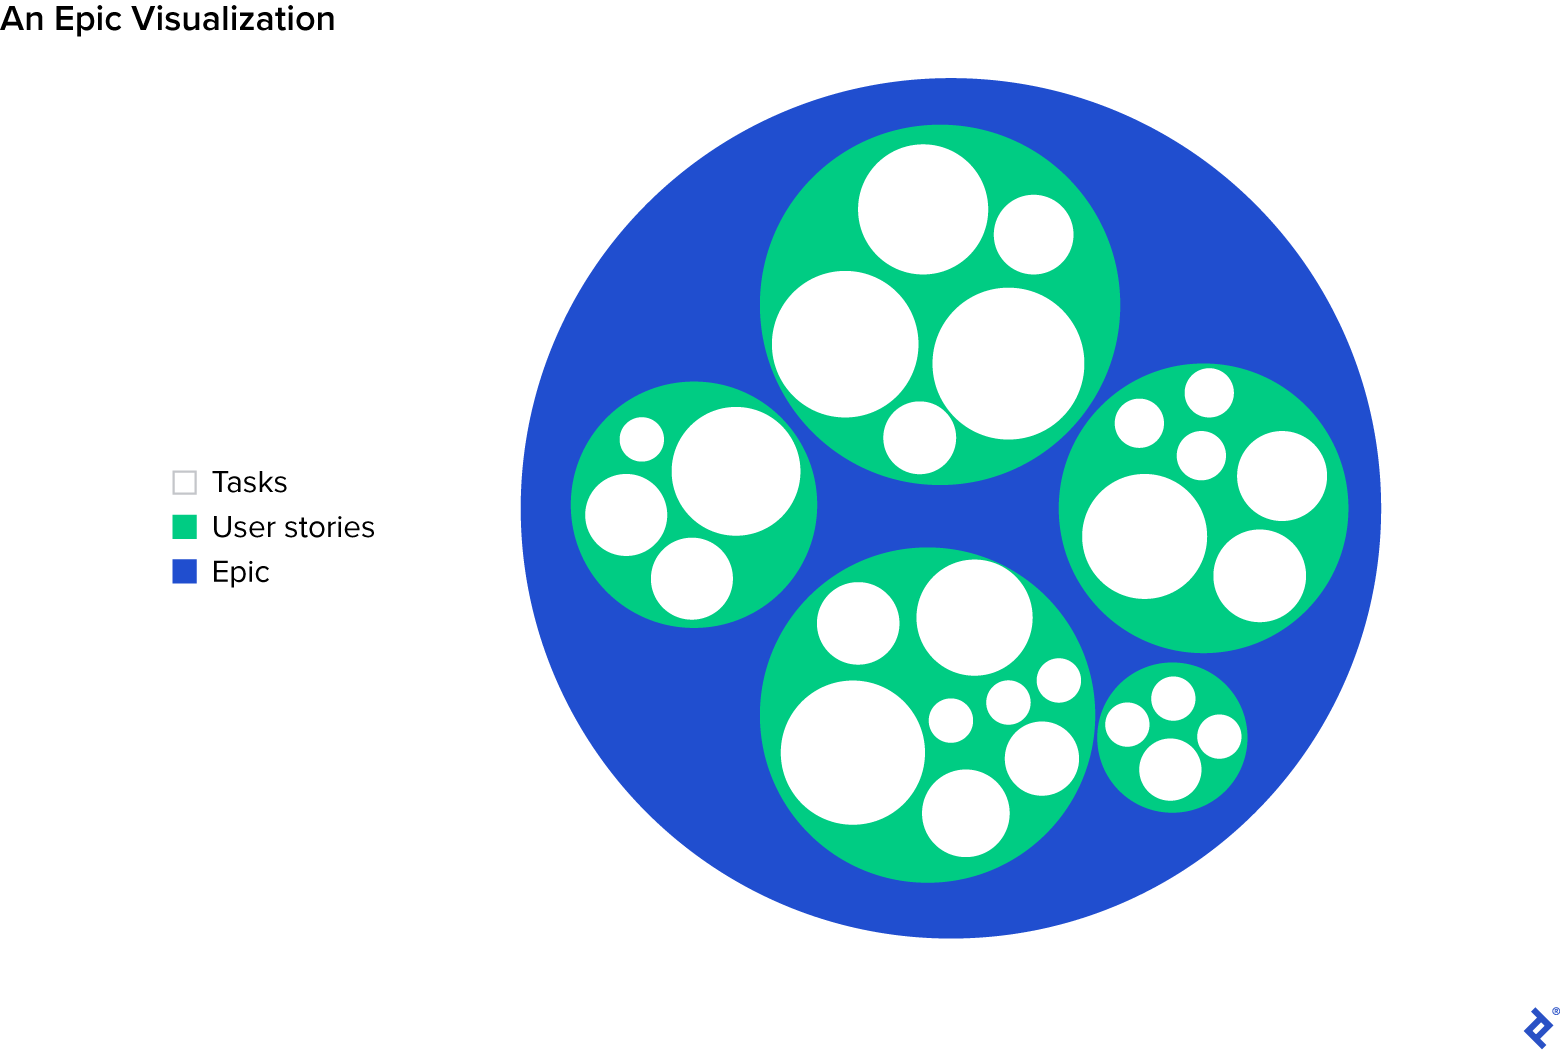 A large circle filled with small circles, each filled with smaller circles, representing the relationship between tasks, user stories, and epics.